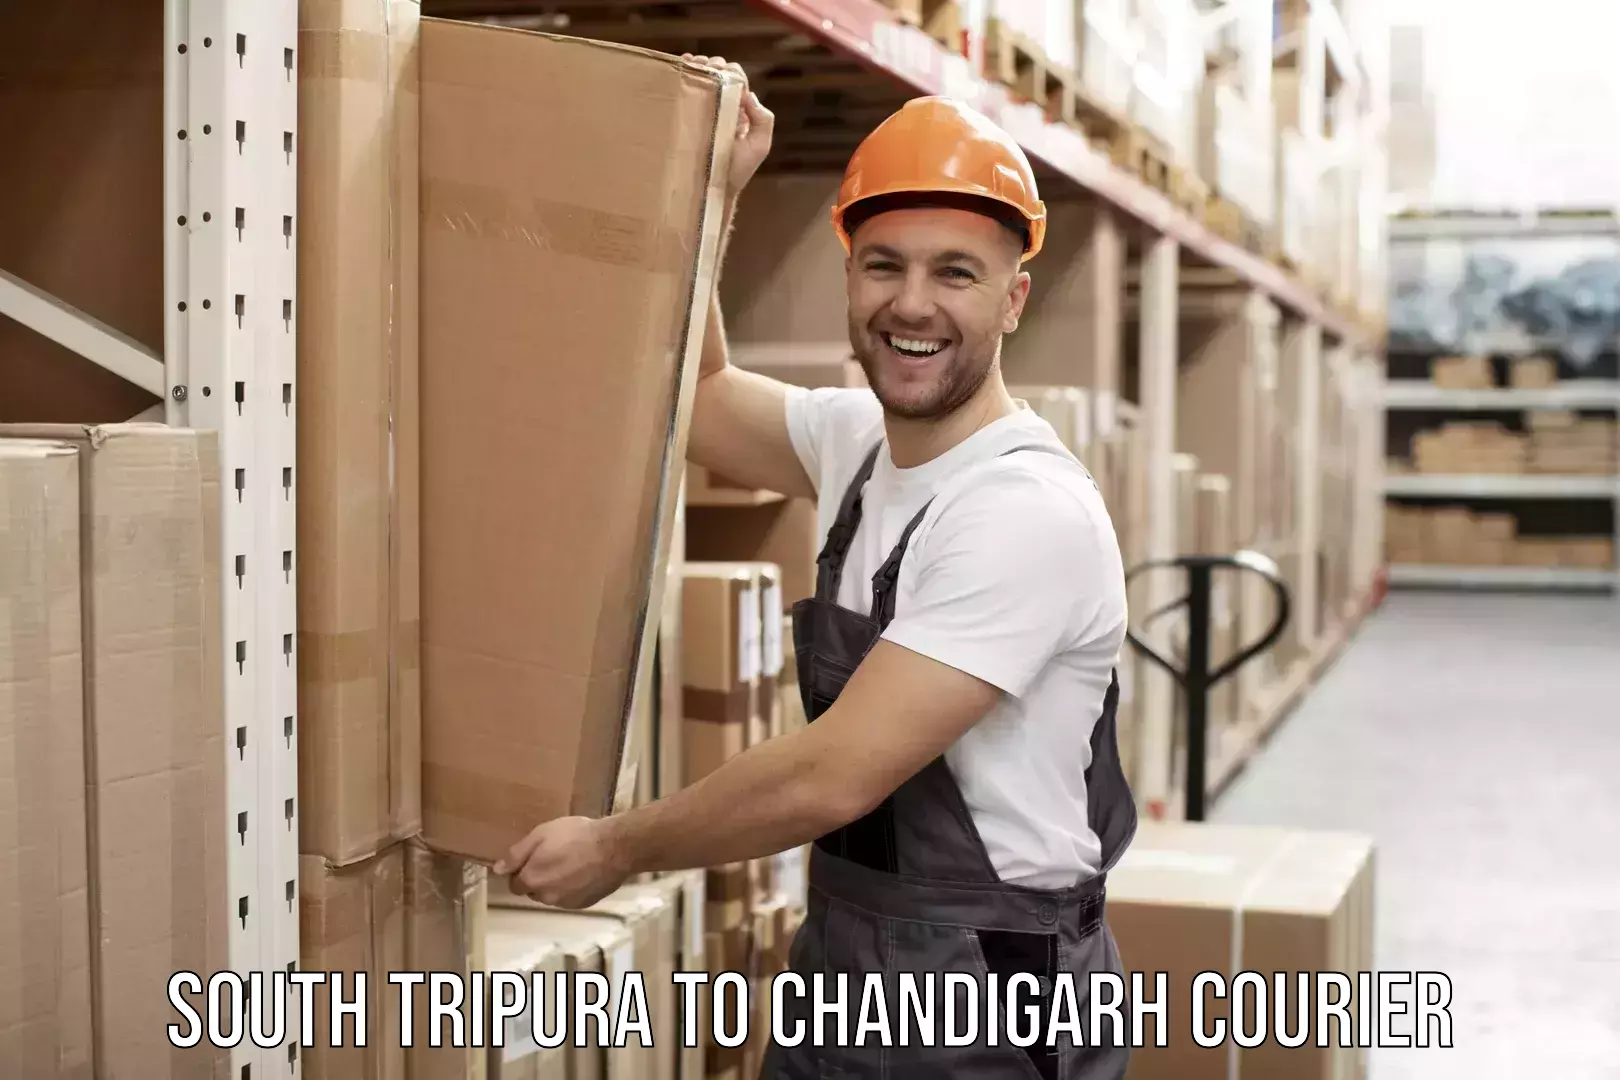 Professional moving company South Tripura to Chandigarh